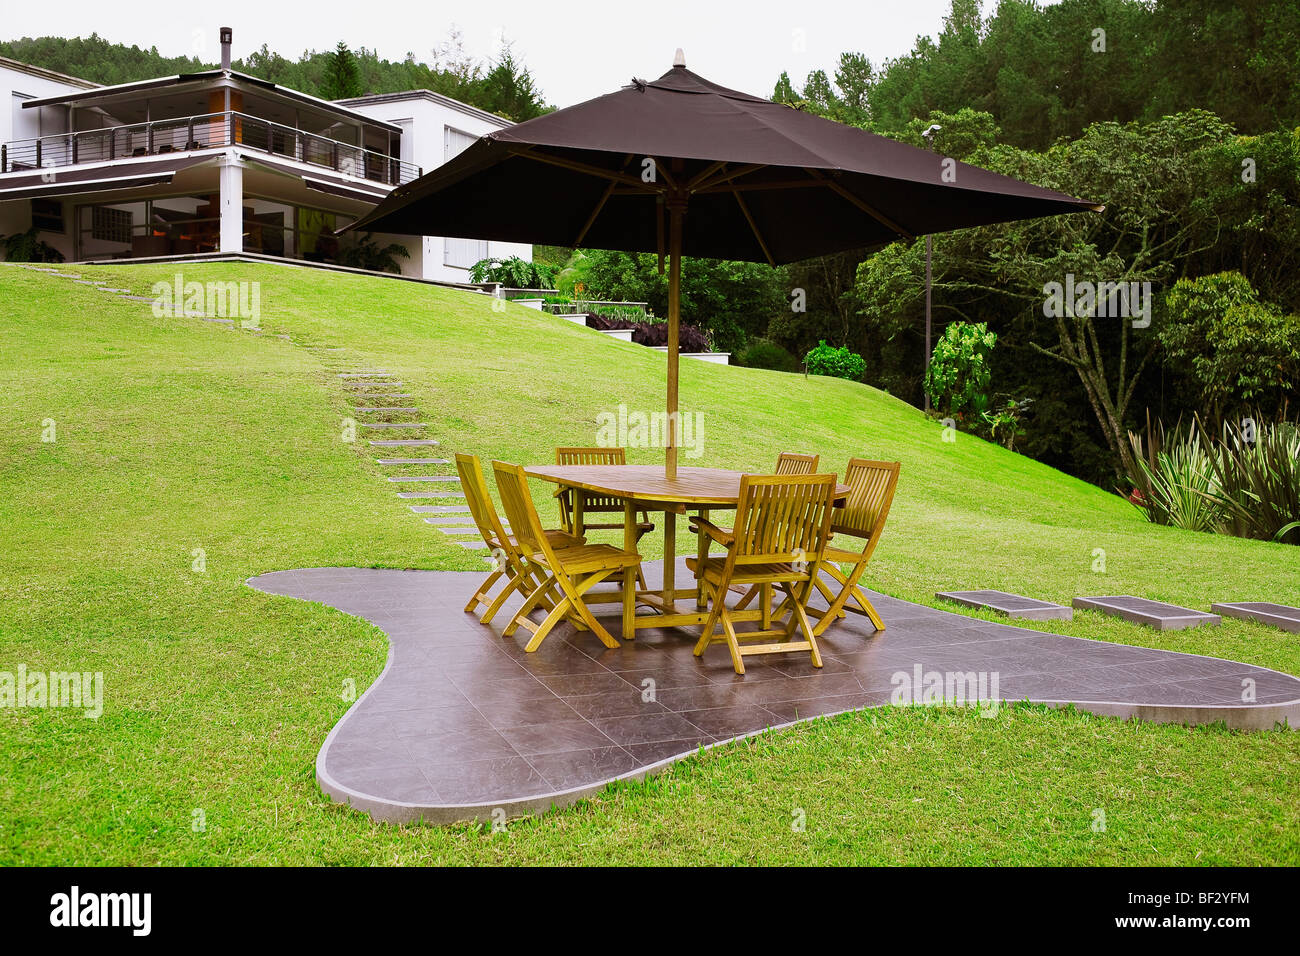 Table and chairs under a patio umbrella in a lawn Stock Photo